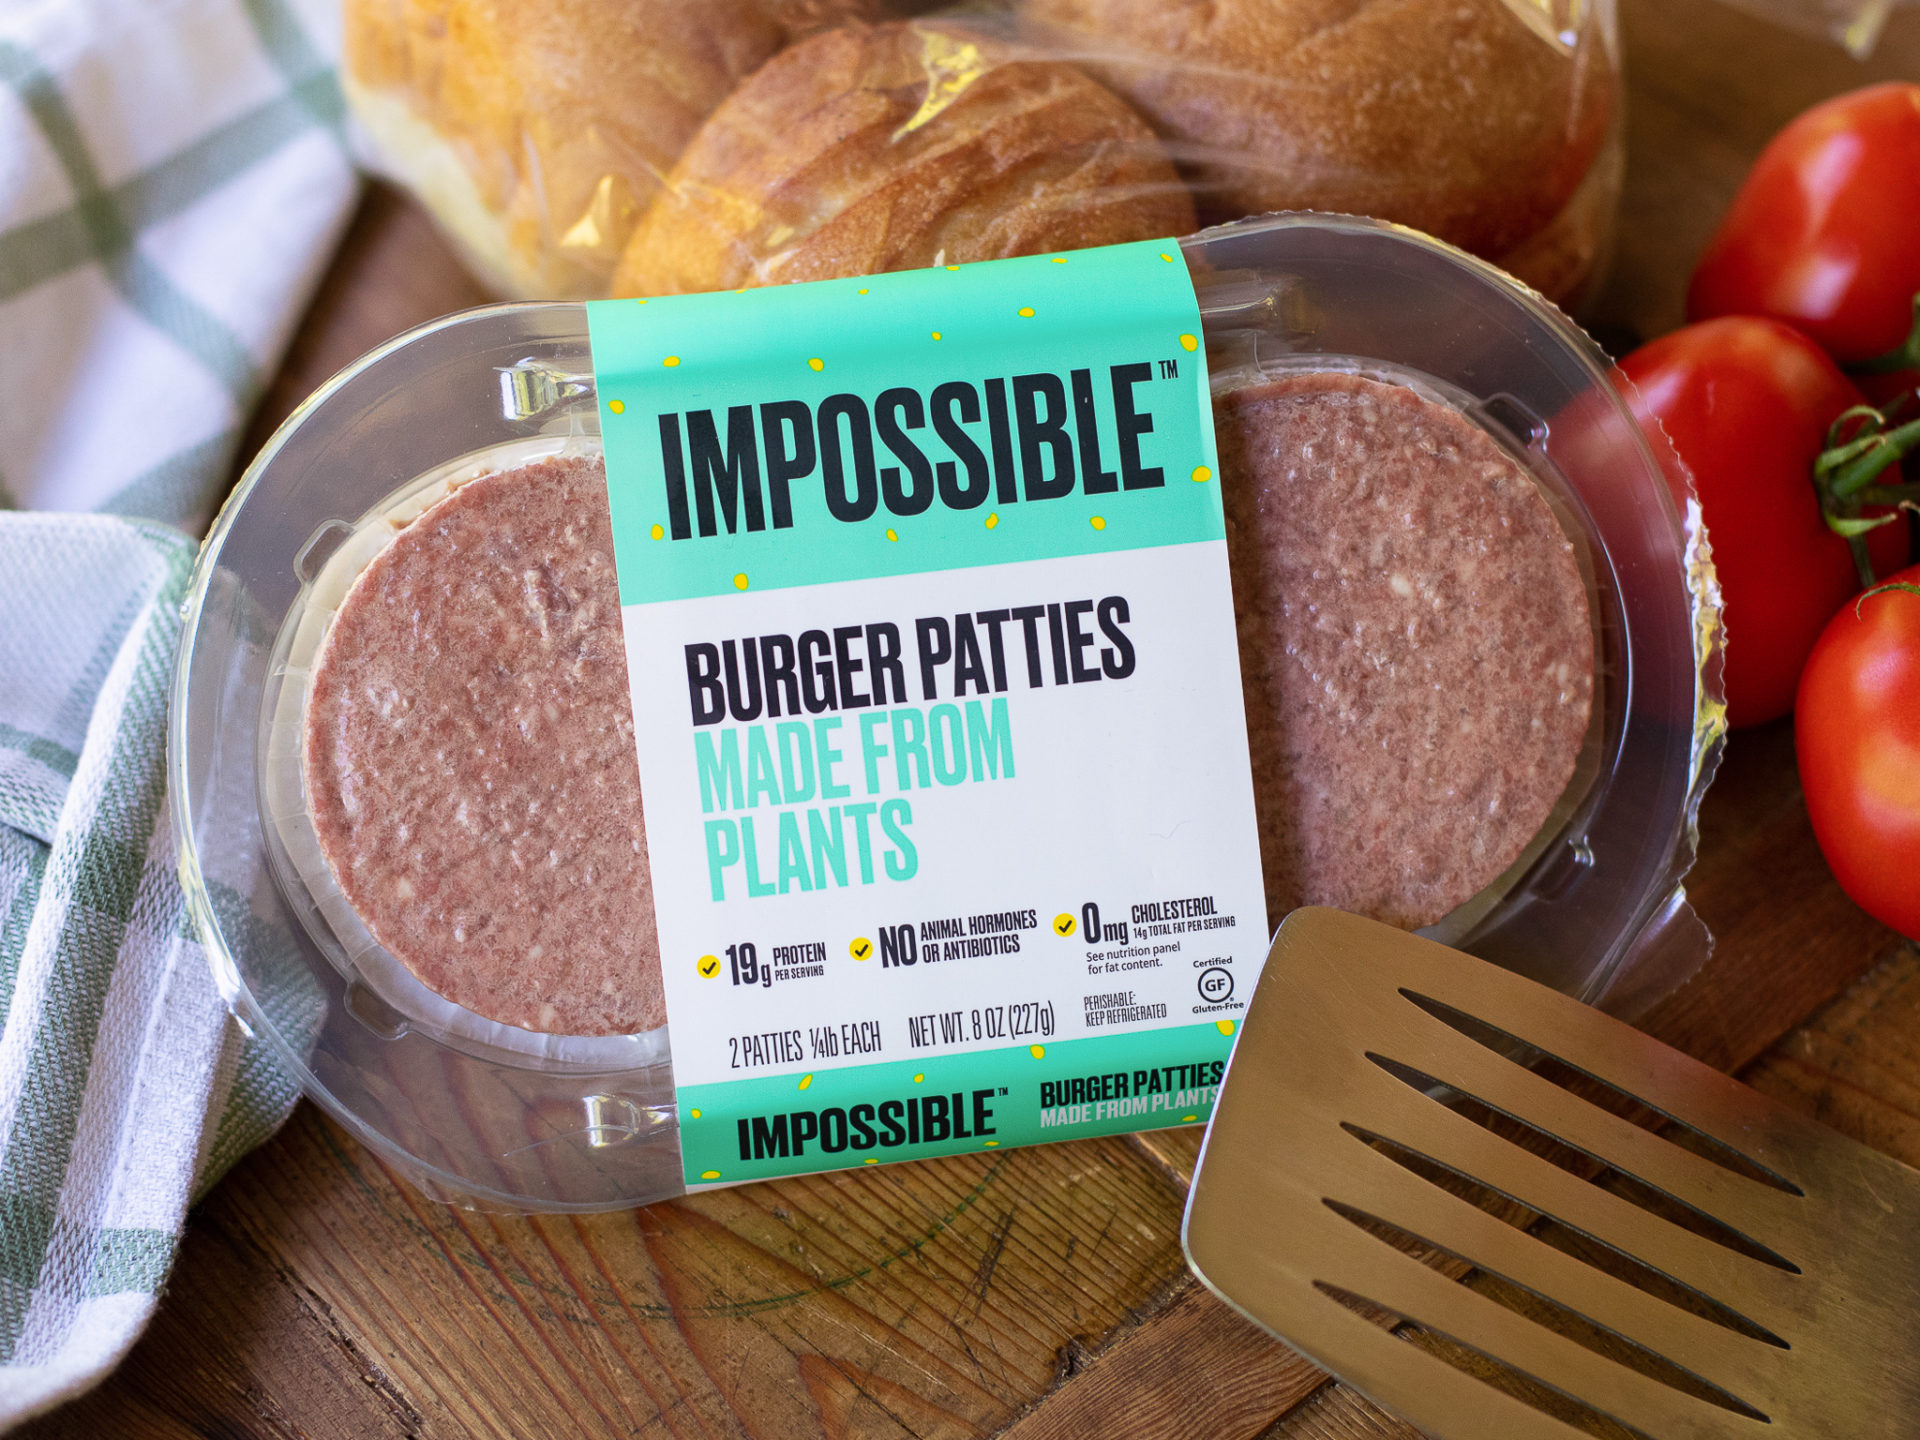 Impossible Burger Patties Only $2.74 At Kroger (Regular Price $6.99)